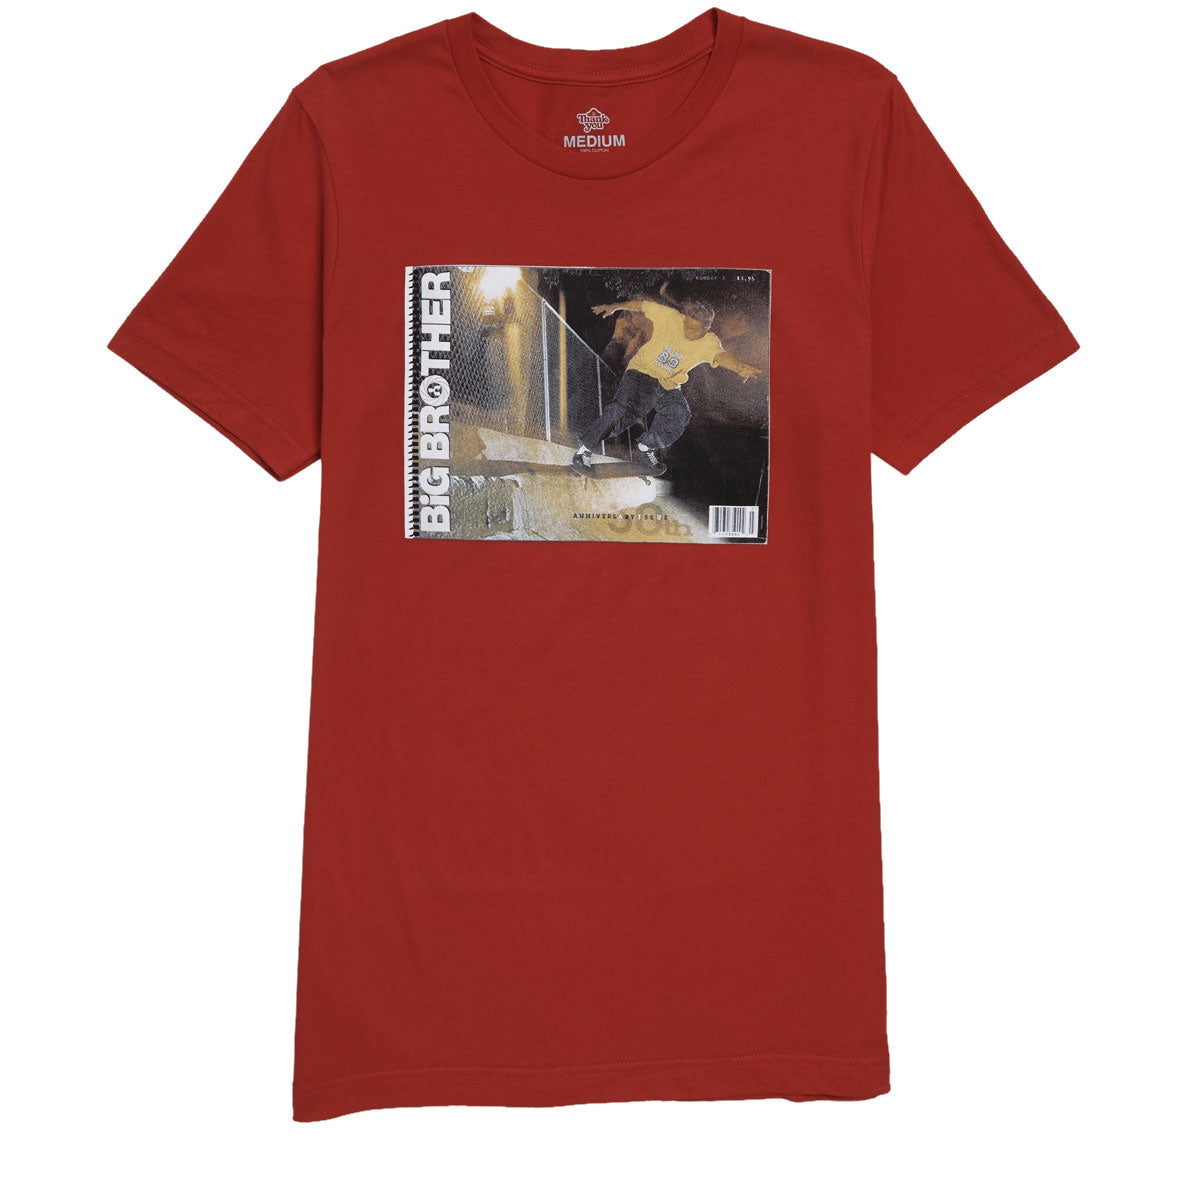 Thank You Anniversary Cover T-Shirt - Red image 1